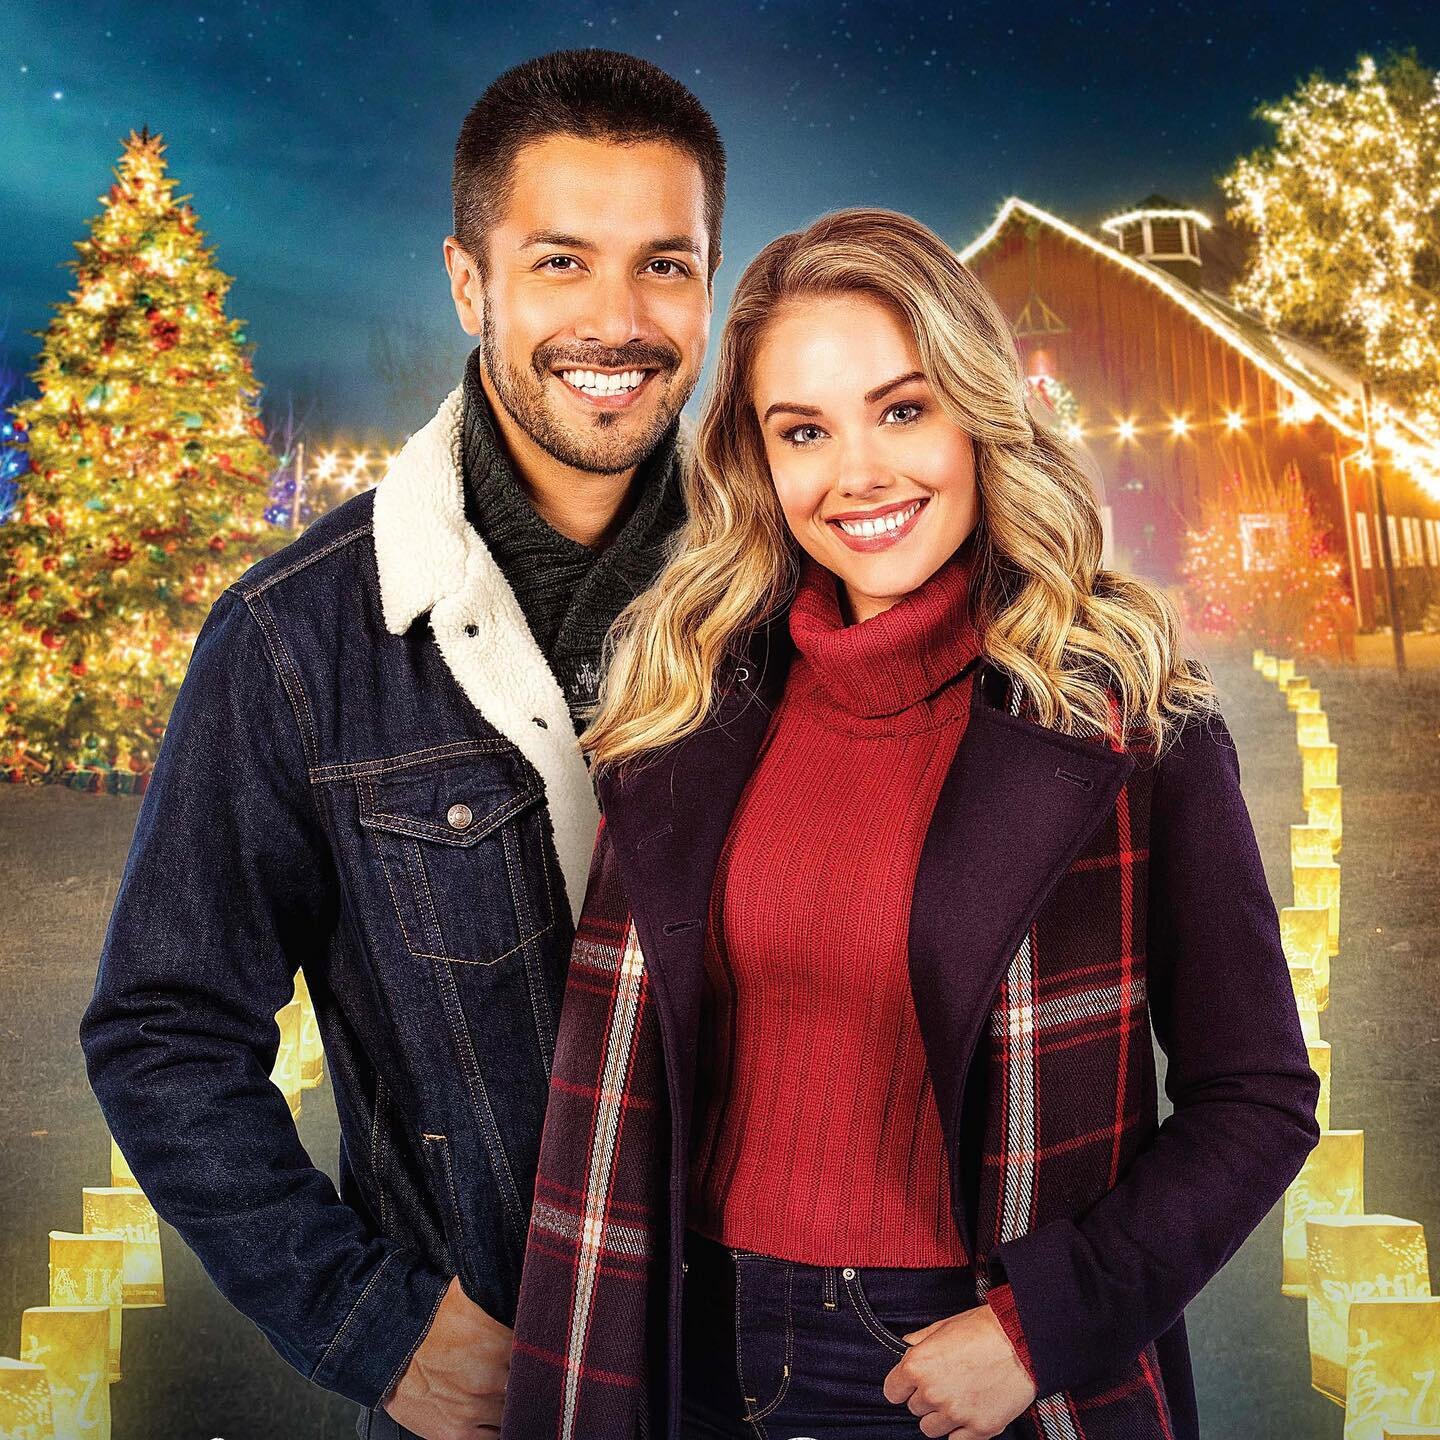 AMERICA: Tune in to watch the world premiere of Lonestar Christmas on @lifetimetv a week from today! Get your hot chocolate ready and your comfiest sweatpants on this Monday, December 14th at 8pm for some baby goats and festive tamales 🐐 ❤️ 🎄